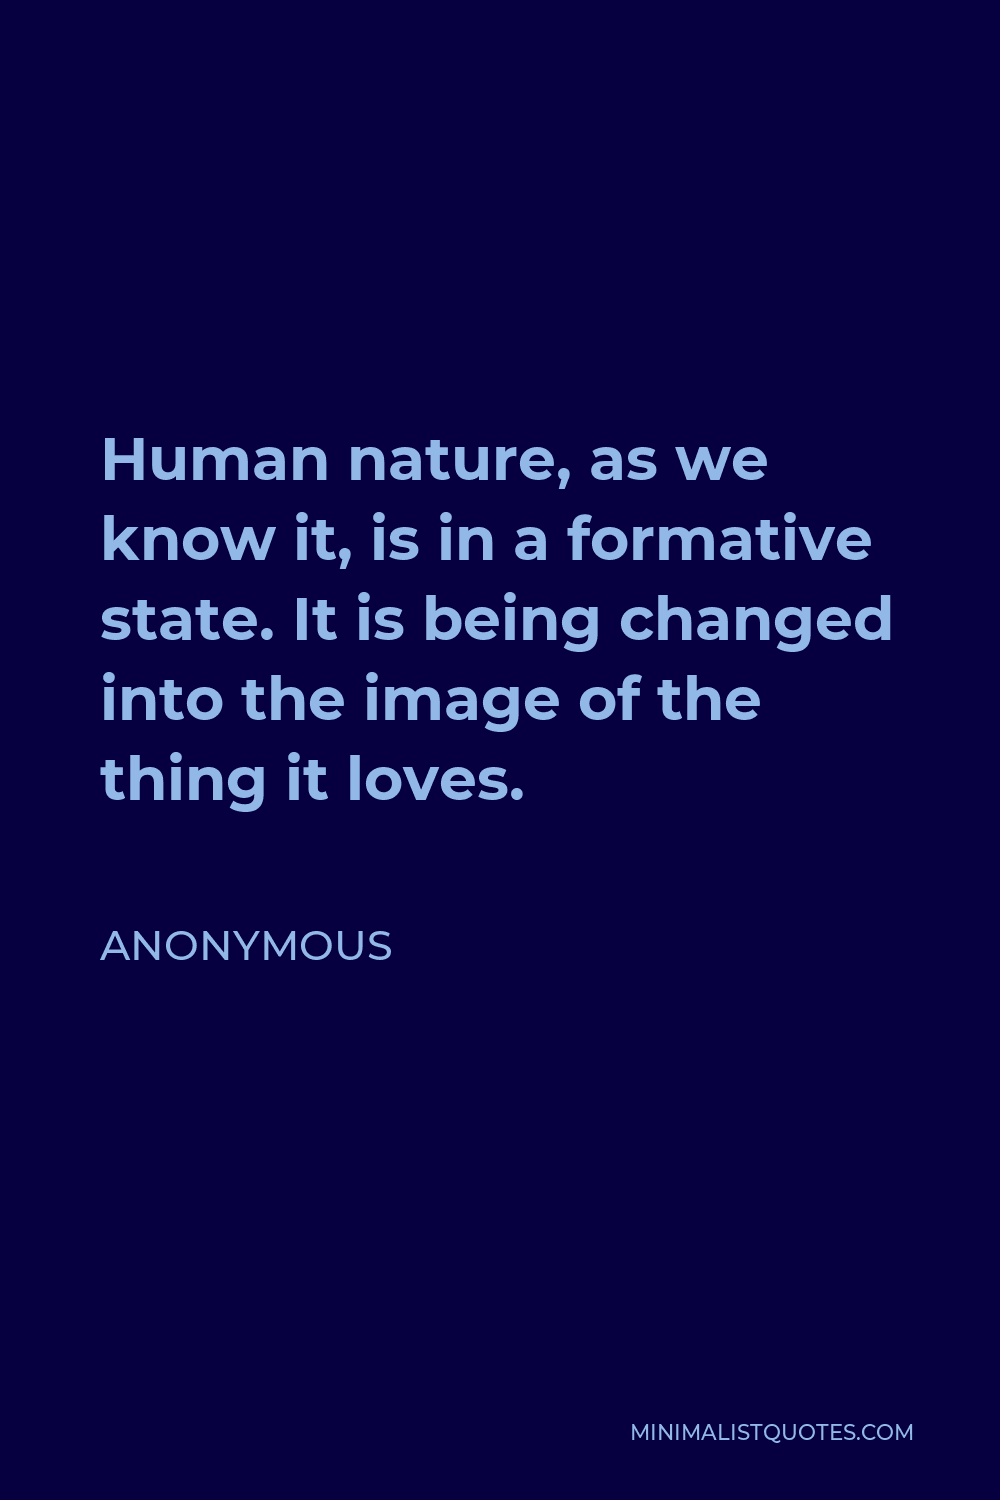 Anonymous Quote - Human nature, as we know it, is in a formative state. It is being changed into the image of the thing it loves.